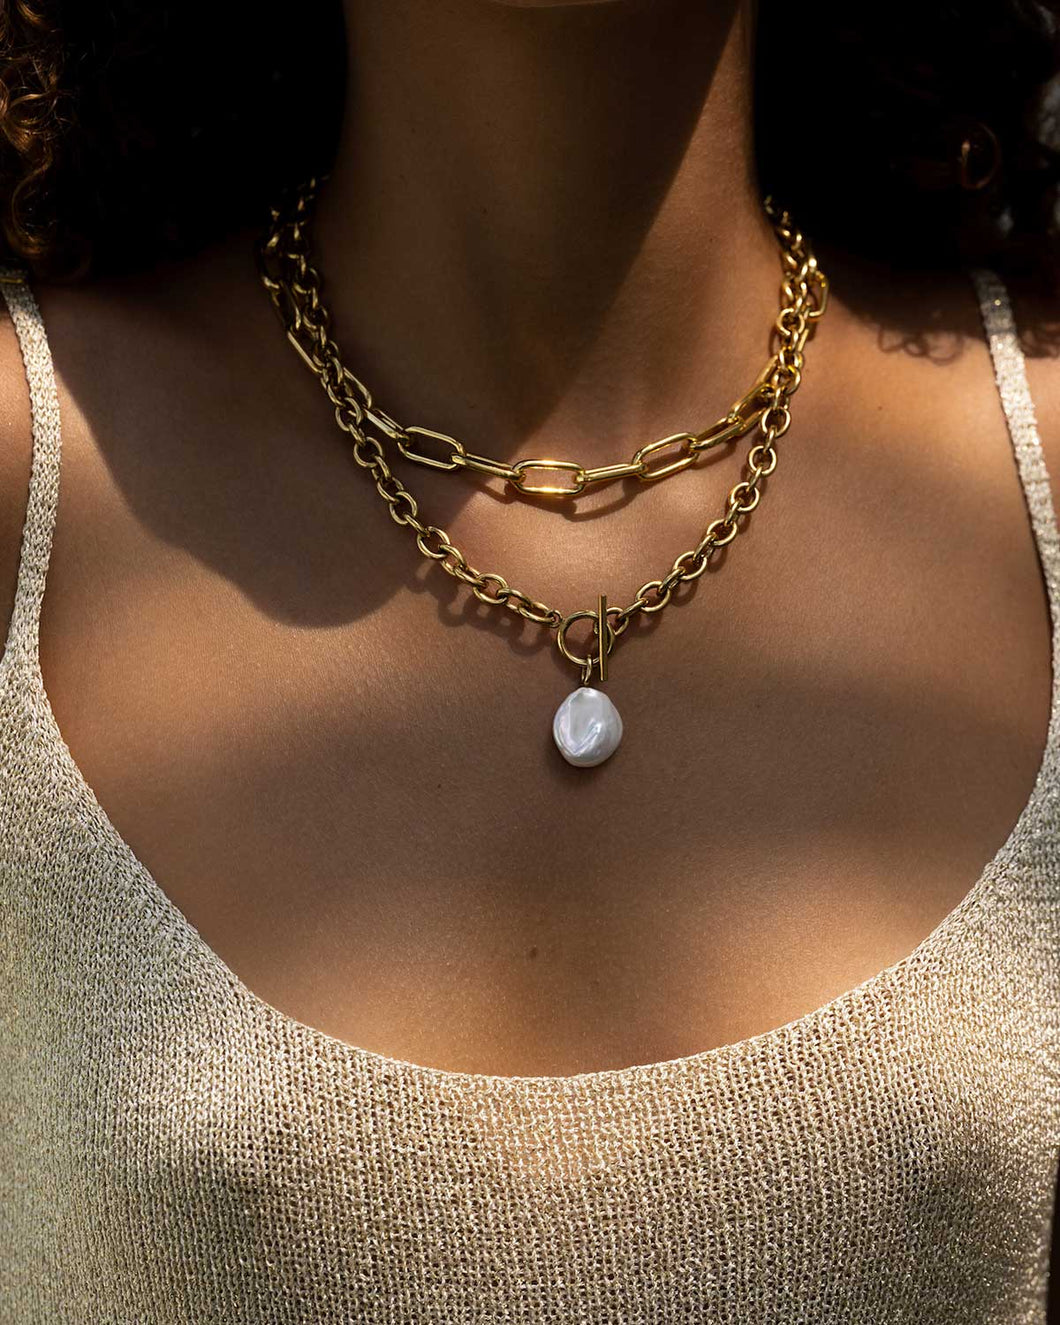 Enhance your style effortlessly with this pearl and gold chain necklace. Featuring a genuine freshwater pearl on a chunky gold chain, this necklace adds a touch of elegance to any outfit. The T bar closure and unique shape of the pearl make it a fashion-forward choice. Chain length: 45 cm.